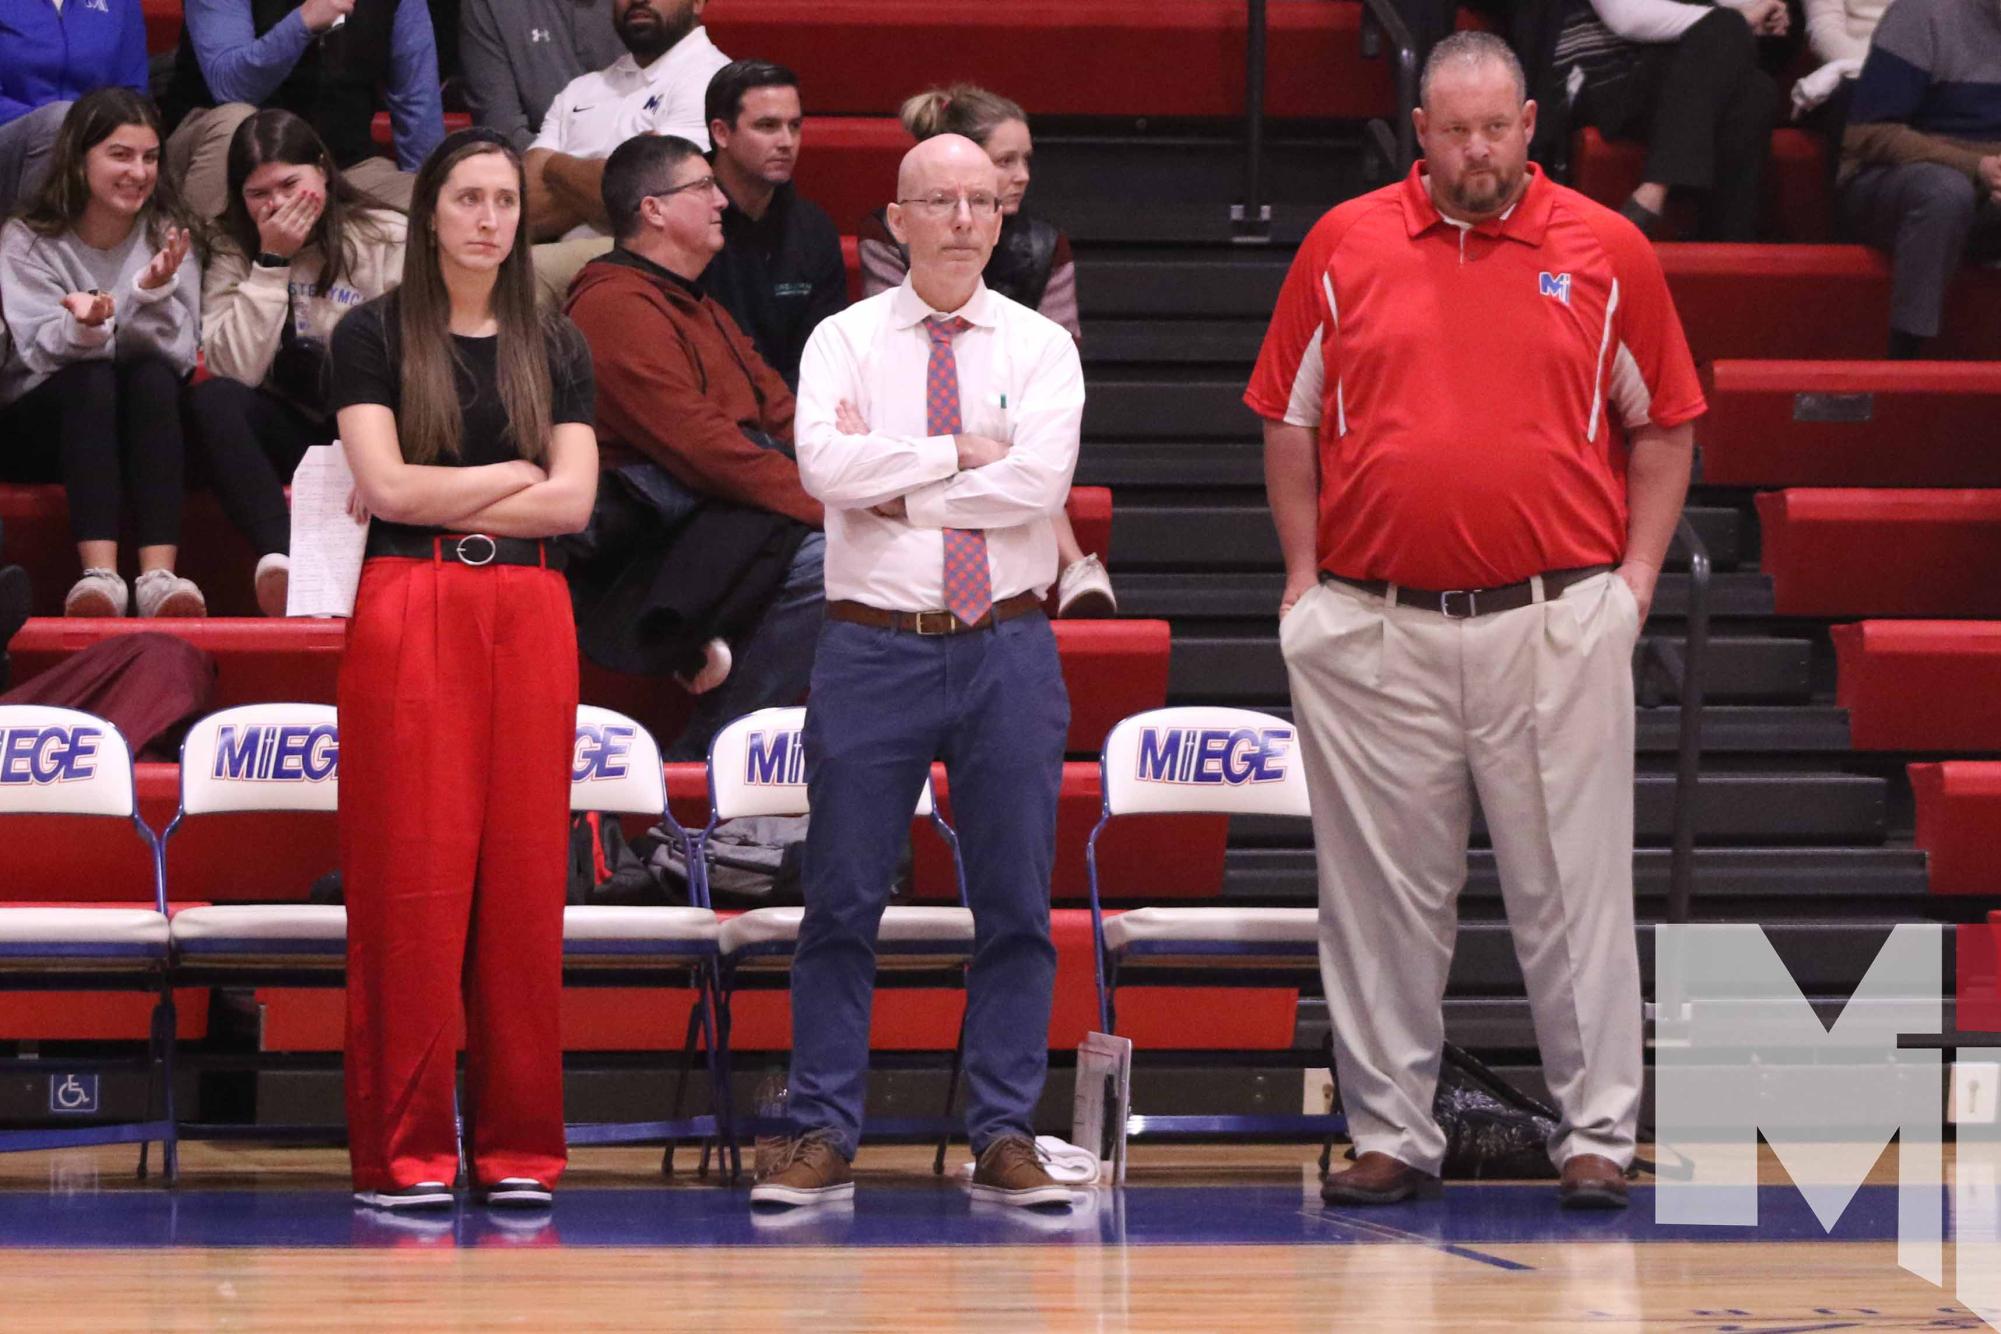 Miege’s New Coaching Duo Ready to Lead Girls Basketball Team to Success